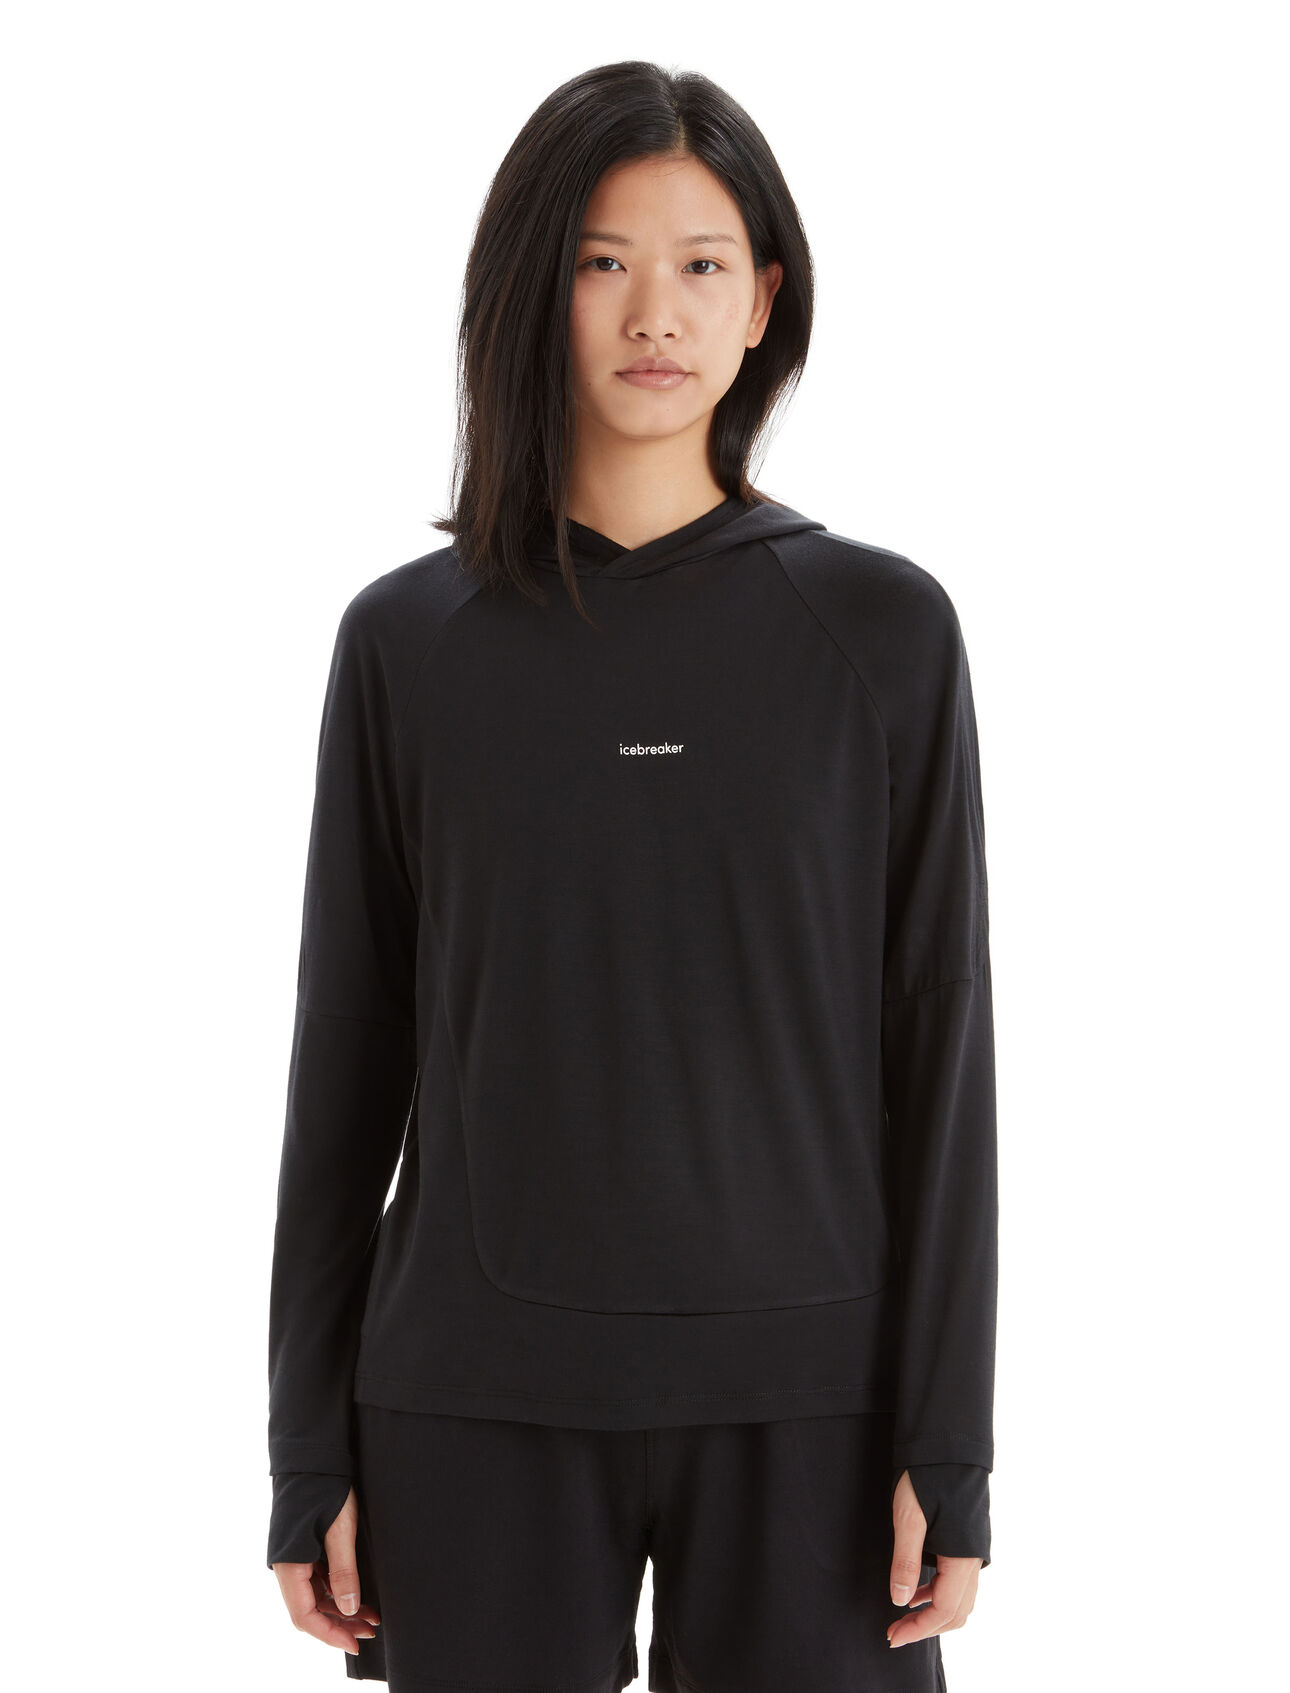 Womens 125 Cool-Lite™ Merino Blend Sphere Long Sleeve Hoodie A lightweight and breathable performance hoodie designed for aerobic days outside, the Cool-Lite™ Long Sleeve Hoodie features our moisture-wicking Cool-Lite™ merino jersey fabric.